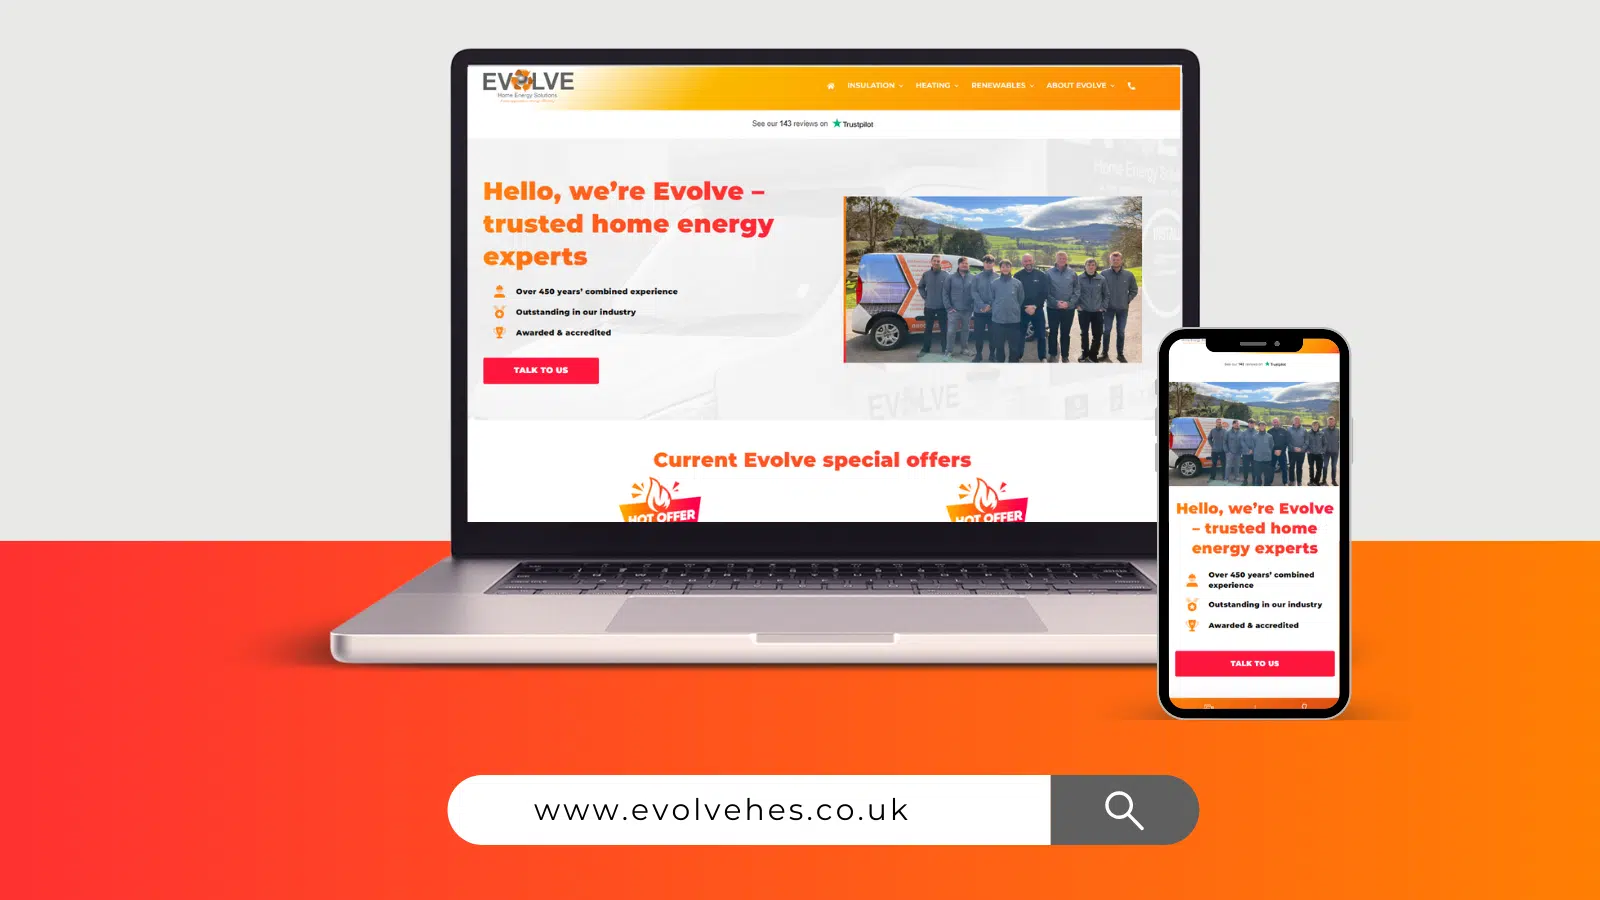 www.evolvehes.co.uk